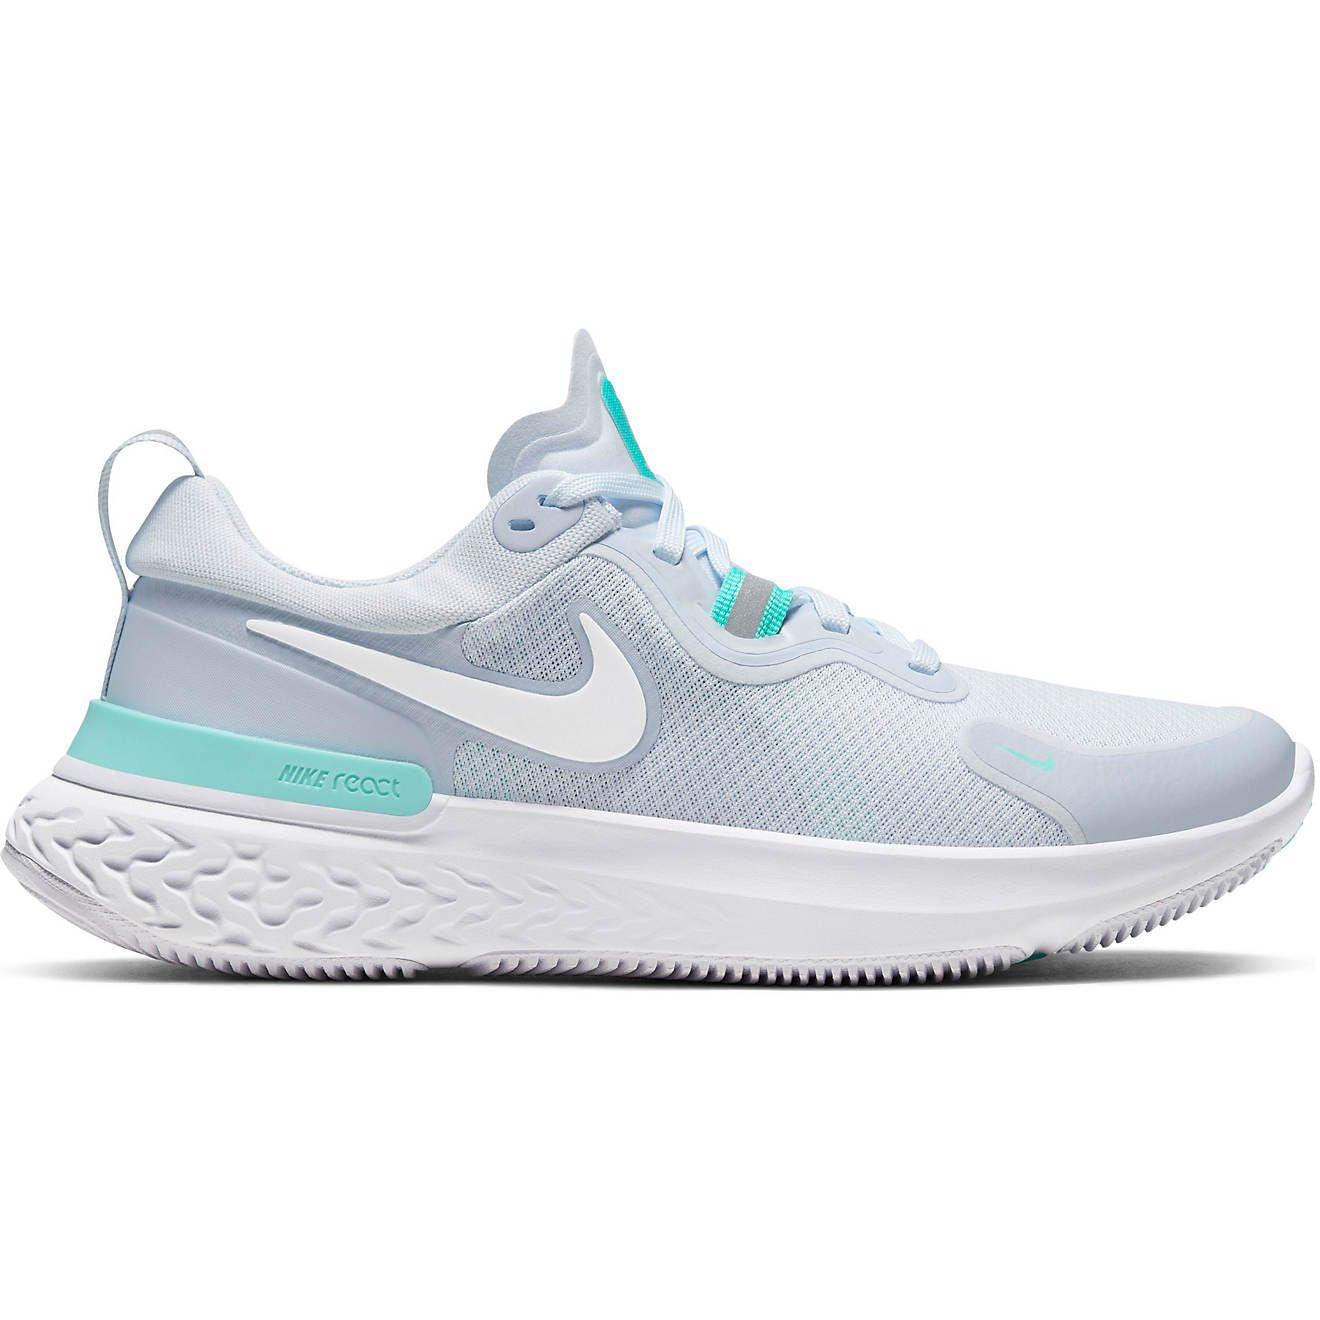 Nike Women's React Miler Running Shoes | Academy Sports + Outdoor Affiliate